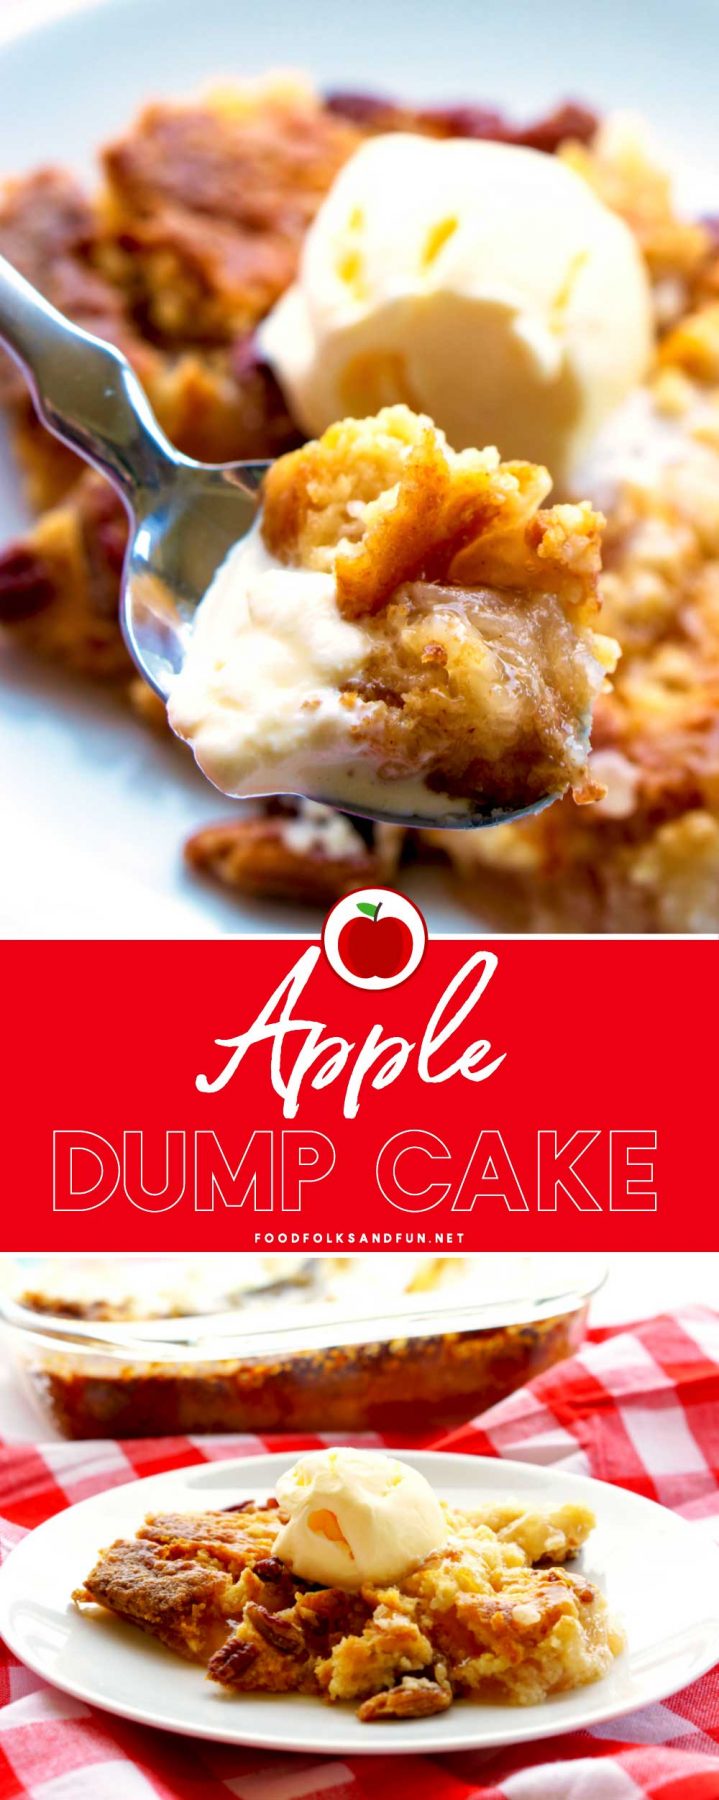 Apple Dump Cake is an easy and irresistible dessert that's made with just 4 ingredients: apple pie filling, cake mix, pecans, and butter! via @foodfolksandfun